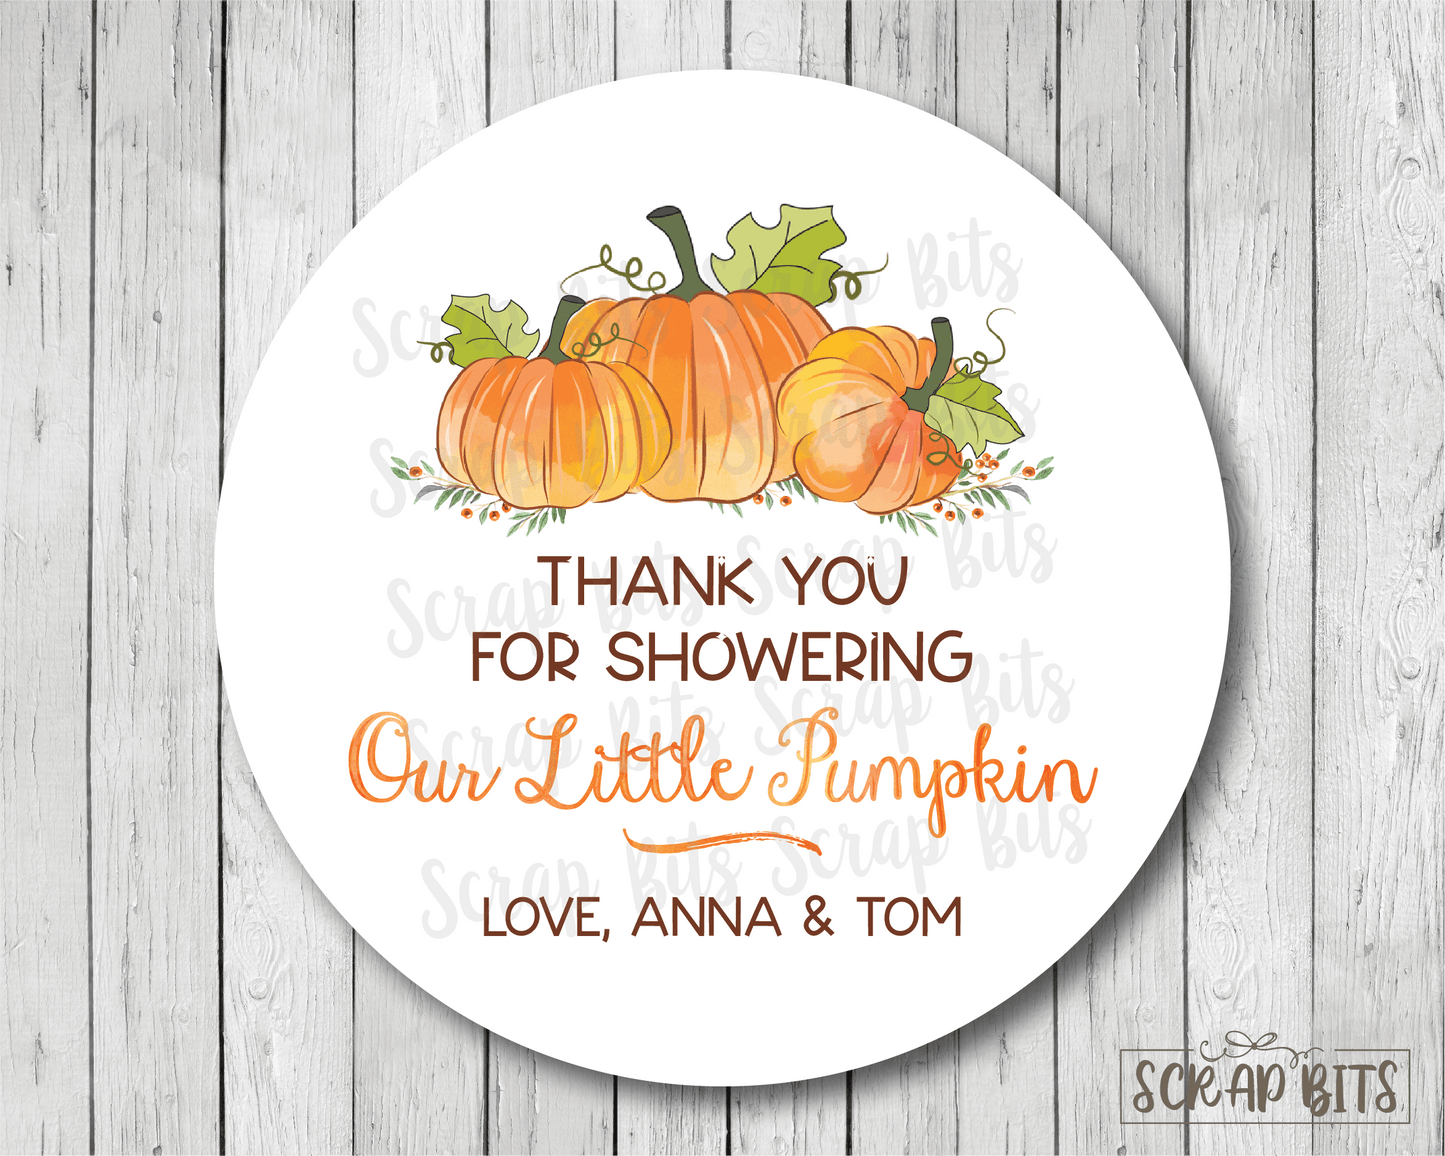 Our Little Pumpkin Stickers . Baby Shower Favor Stickers or Tags - Scrap Bits